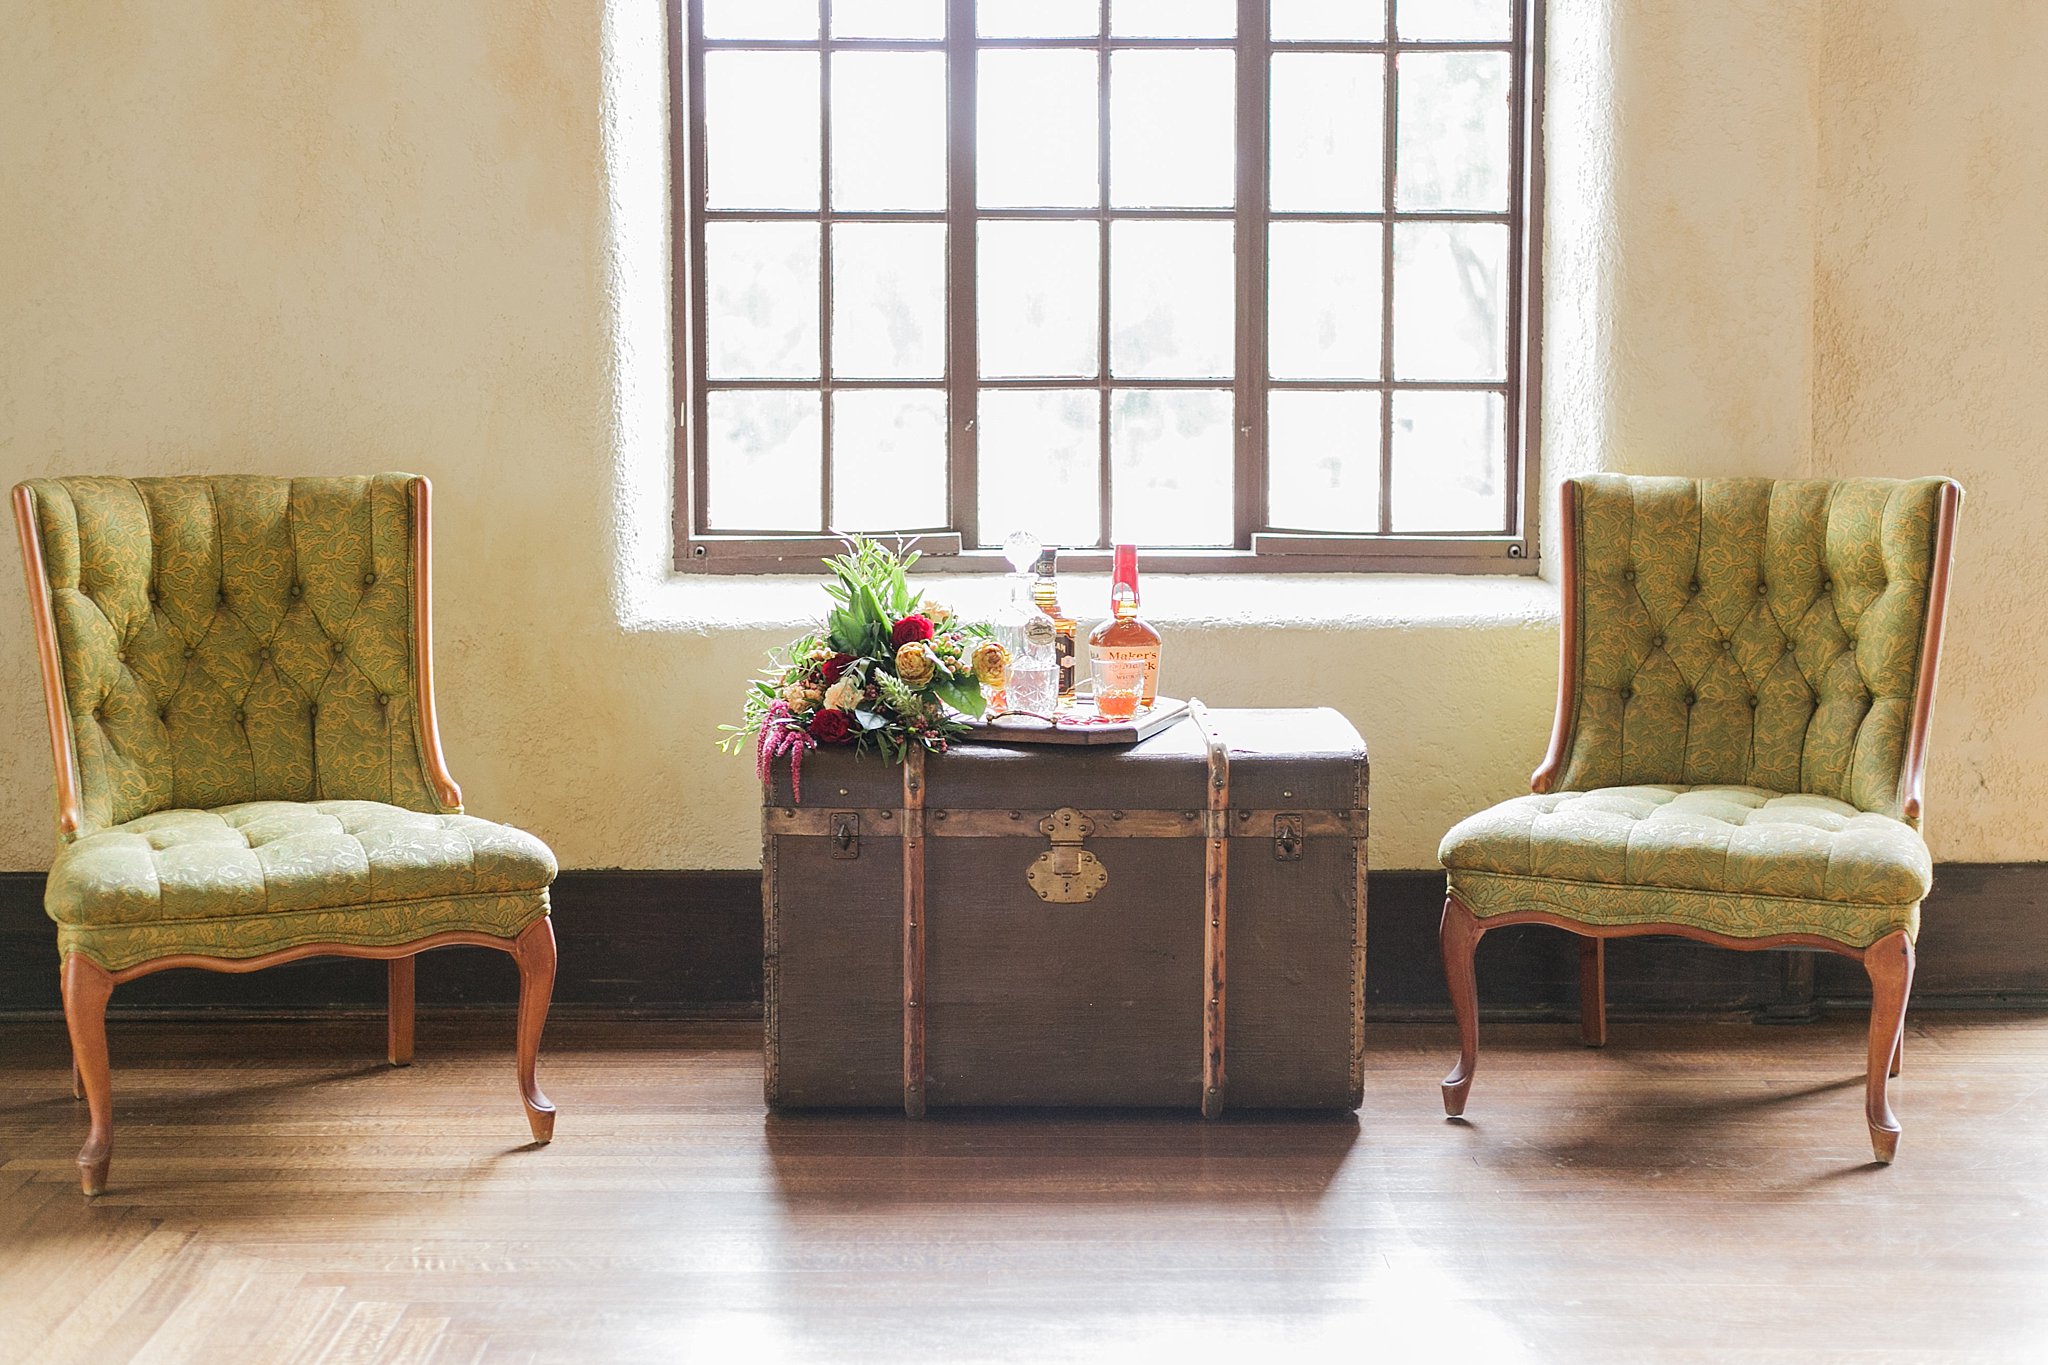 Antique olive chairs flanking an old steamer trunk.